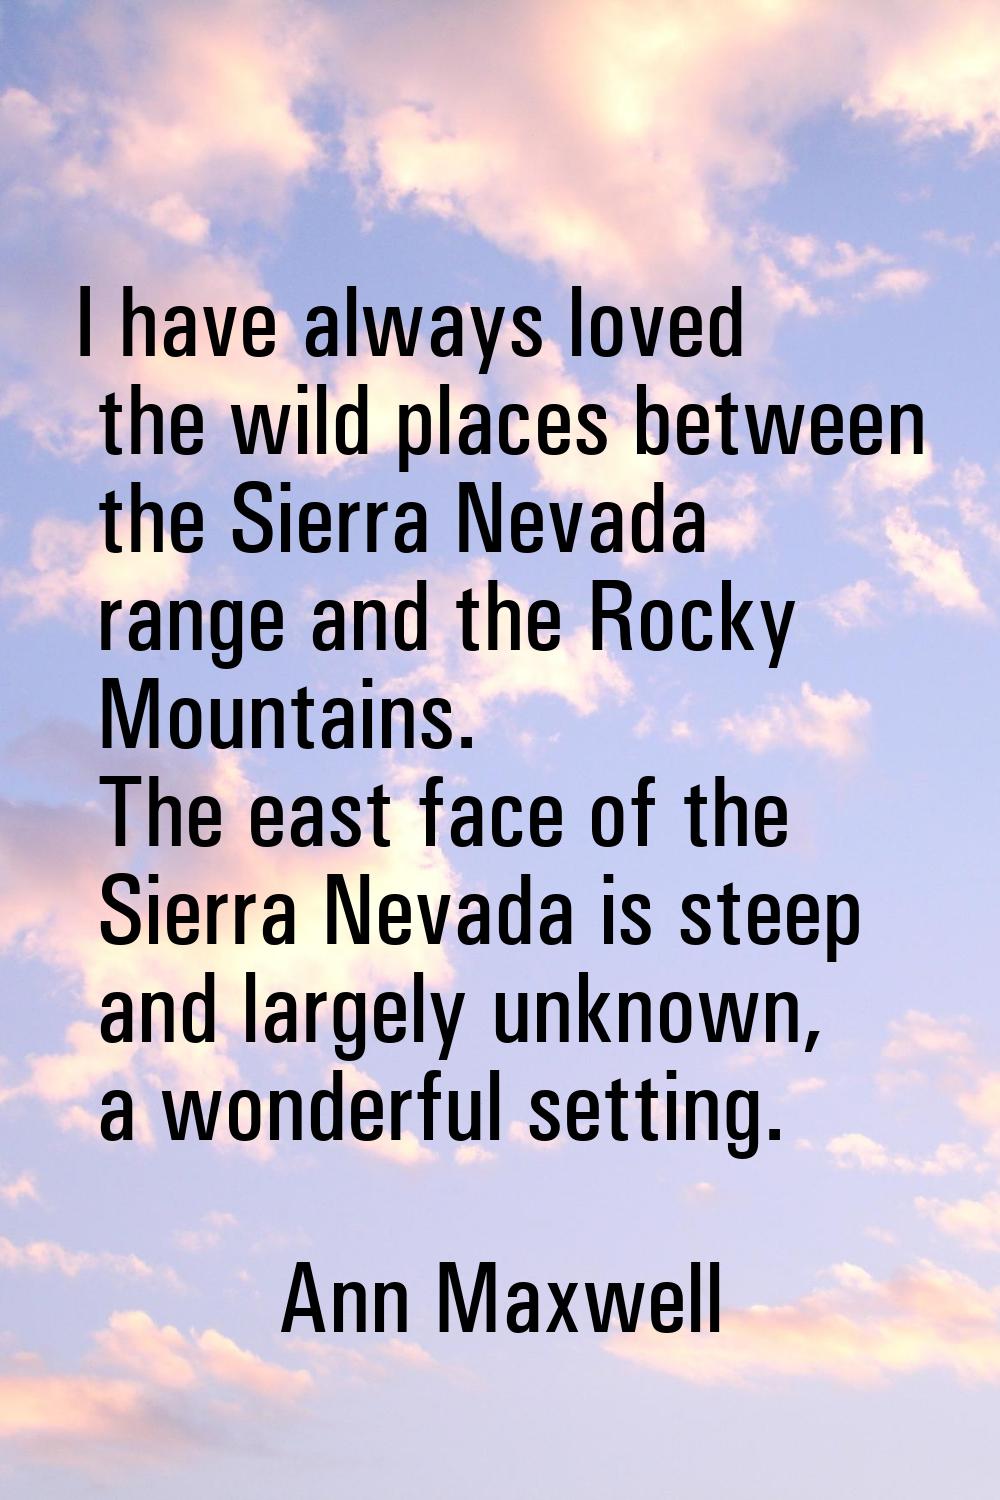 I have always loved the wild places between the Sierra Nevada range and the Rocky Mountains. The ea